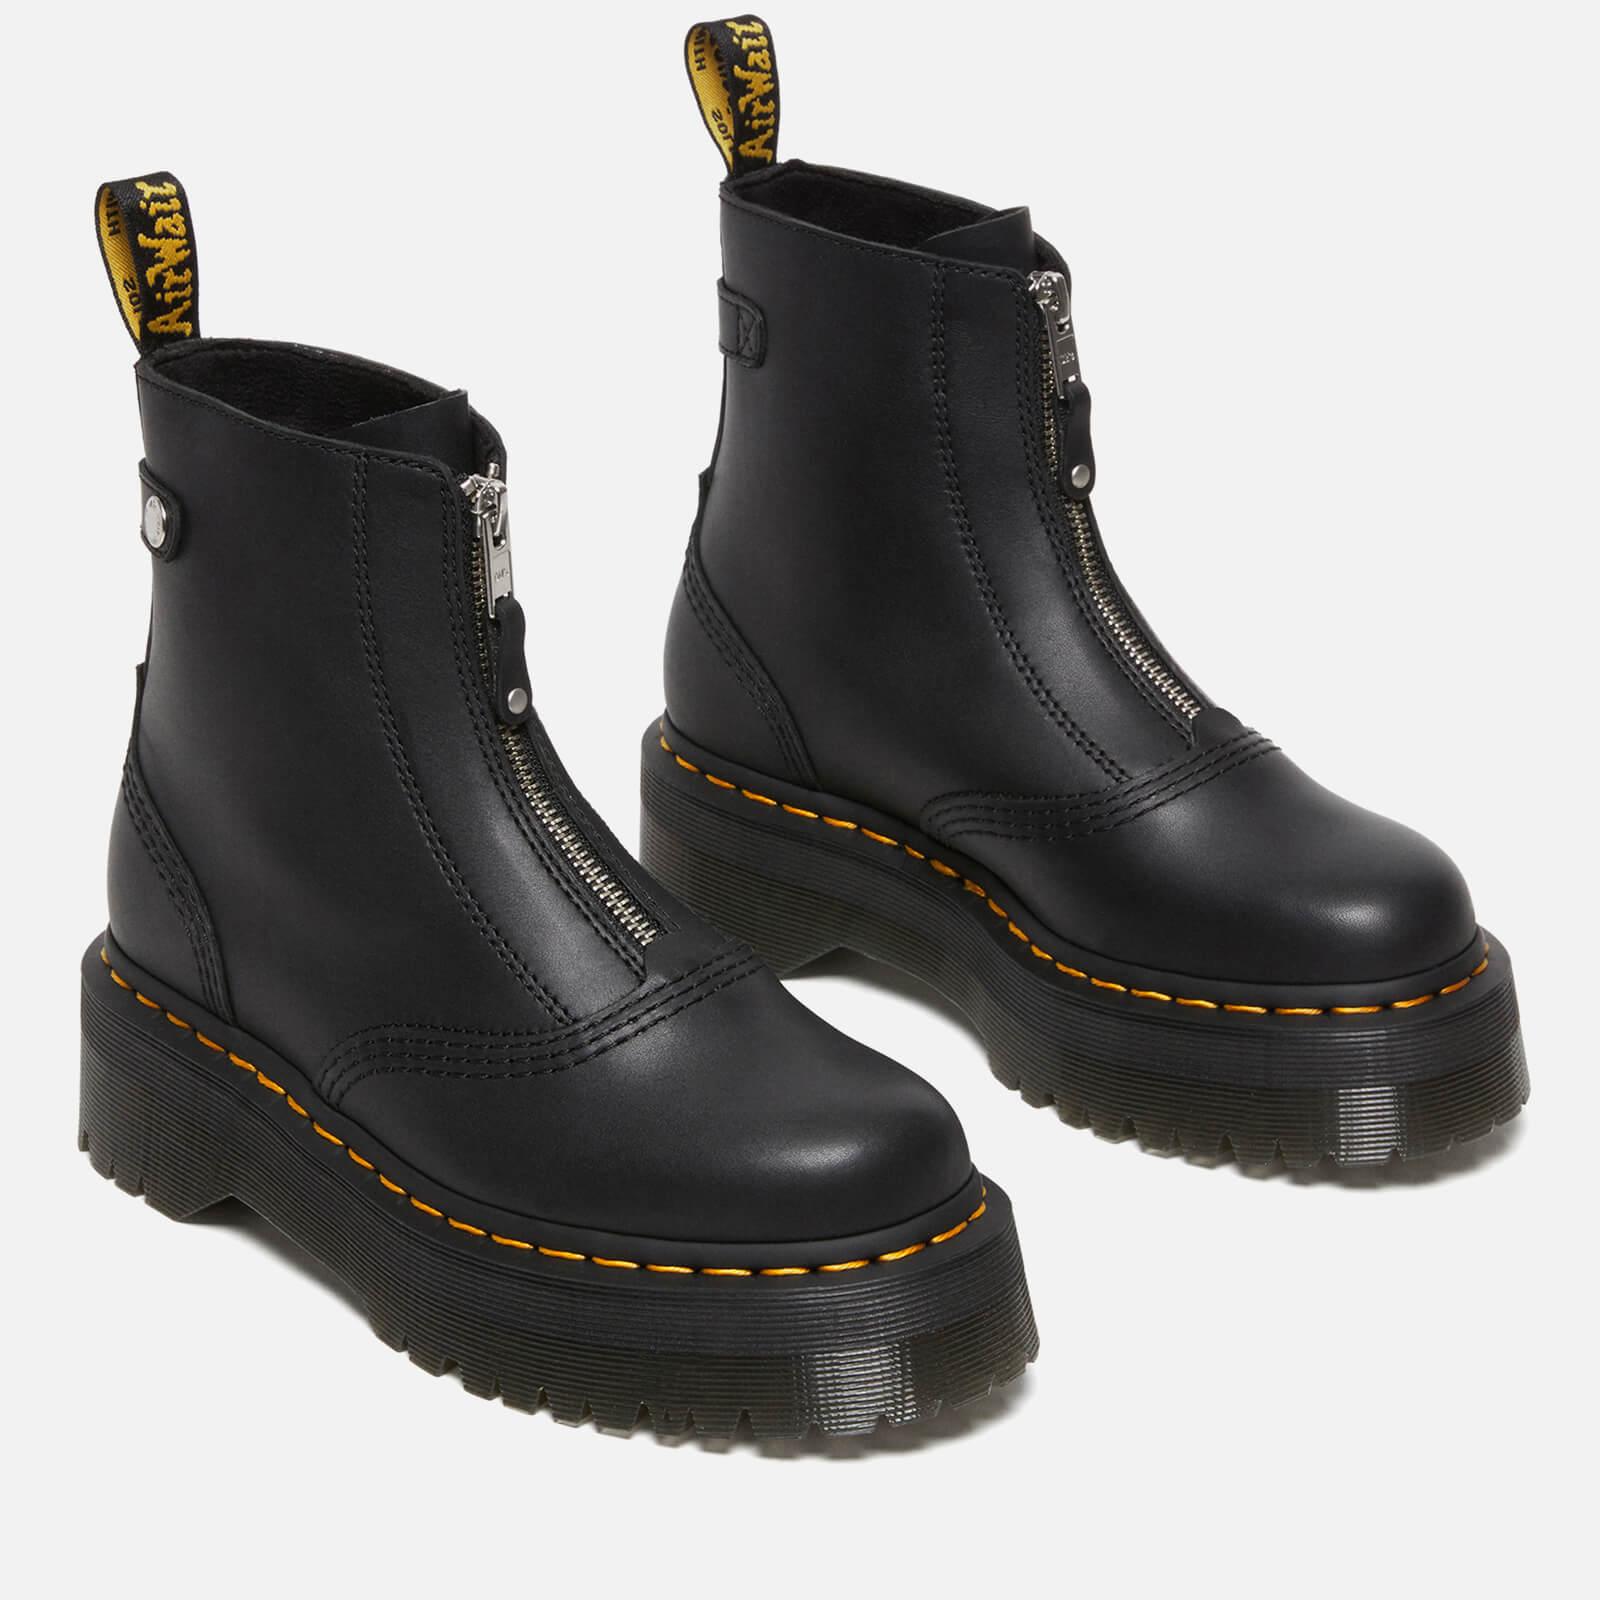 Dr. Martens Jetta Zip Front Leather Boots in Black | Lyst